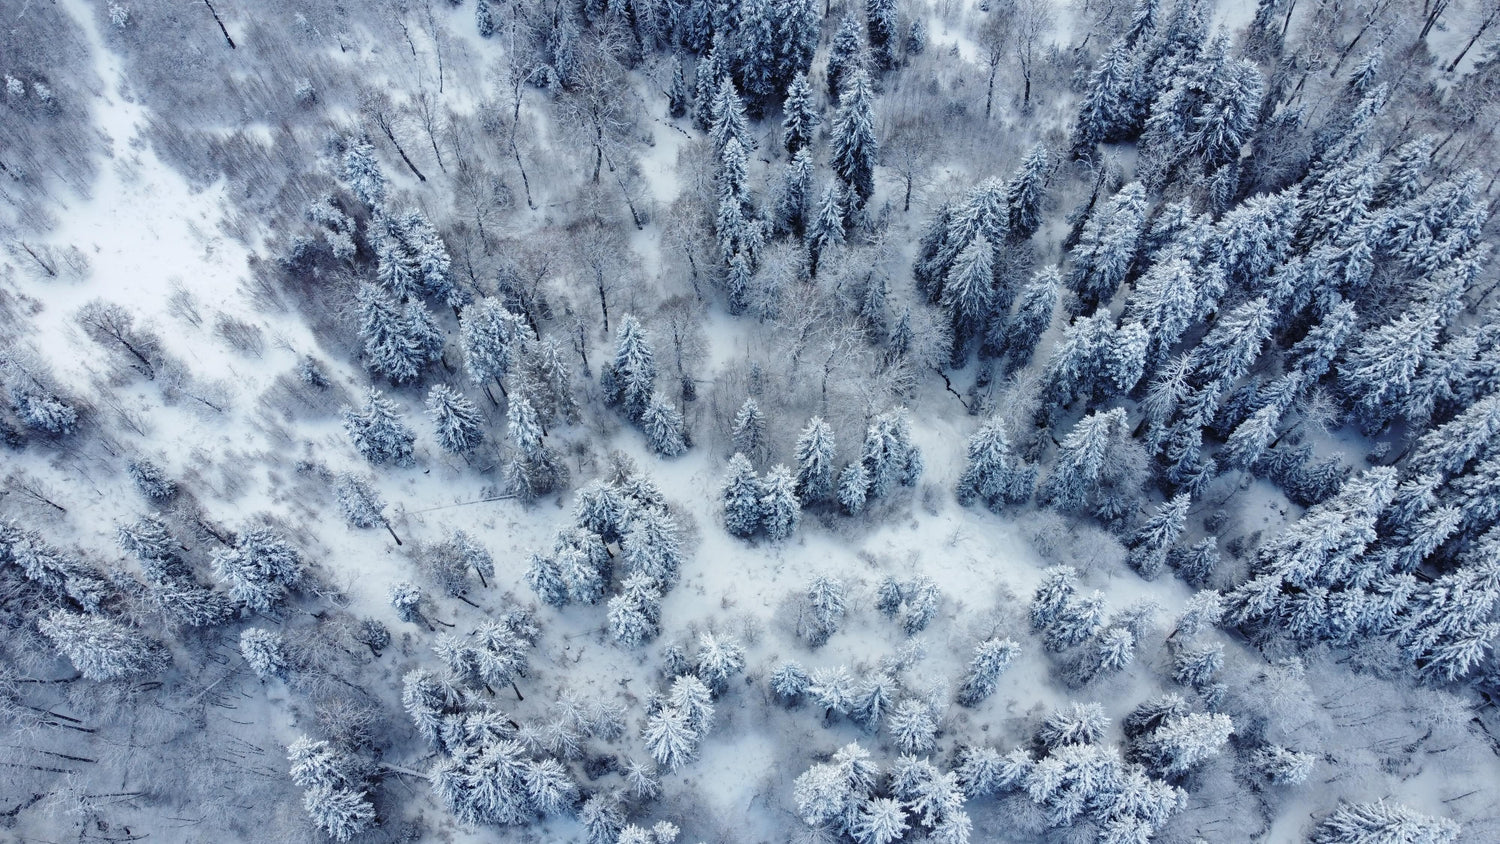 cold, snowy, winter forest